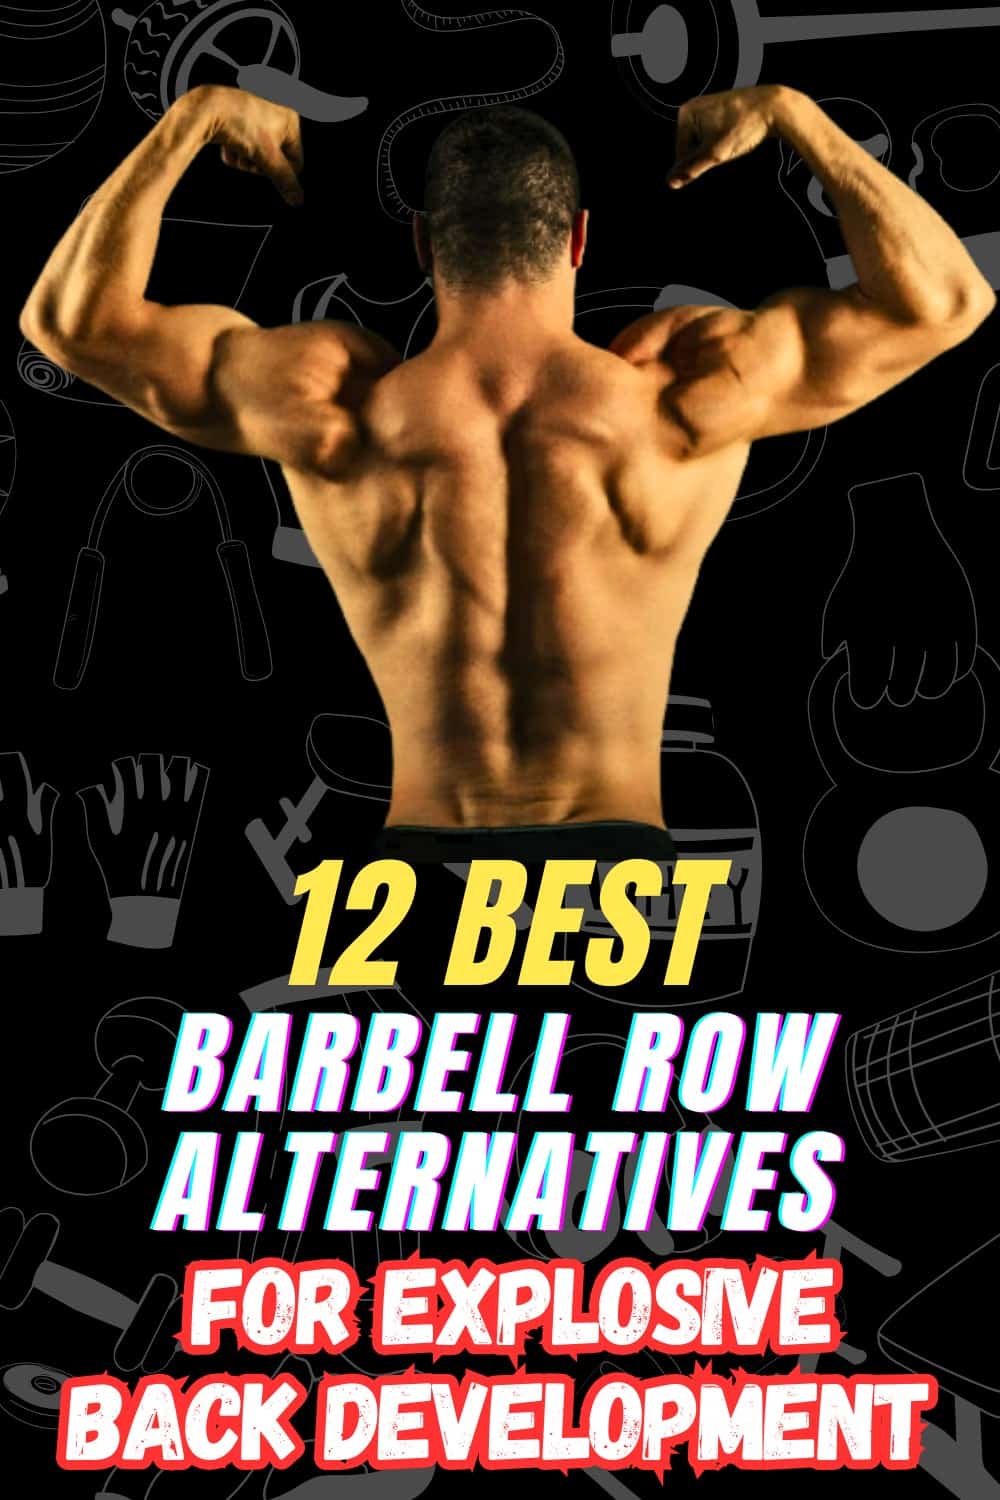 Alternative Exercises for Barbell Rows